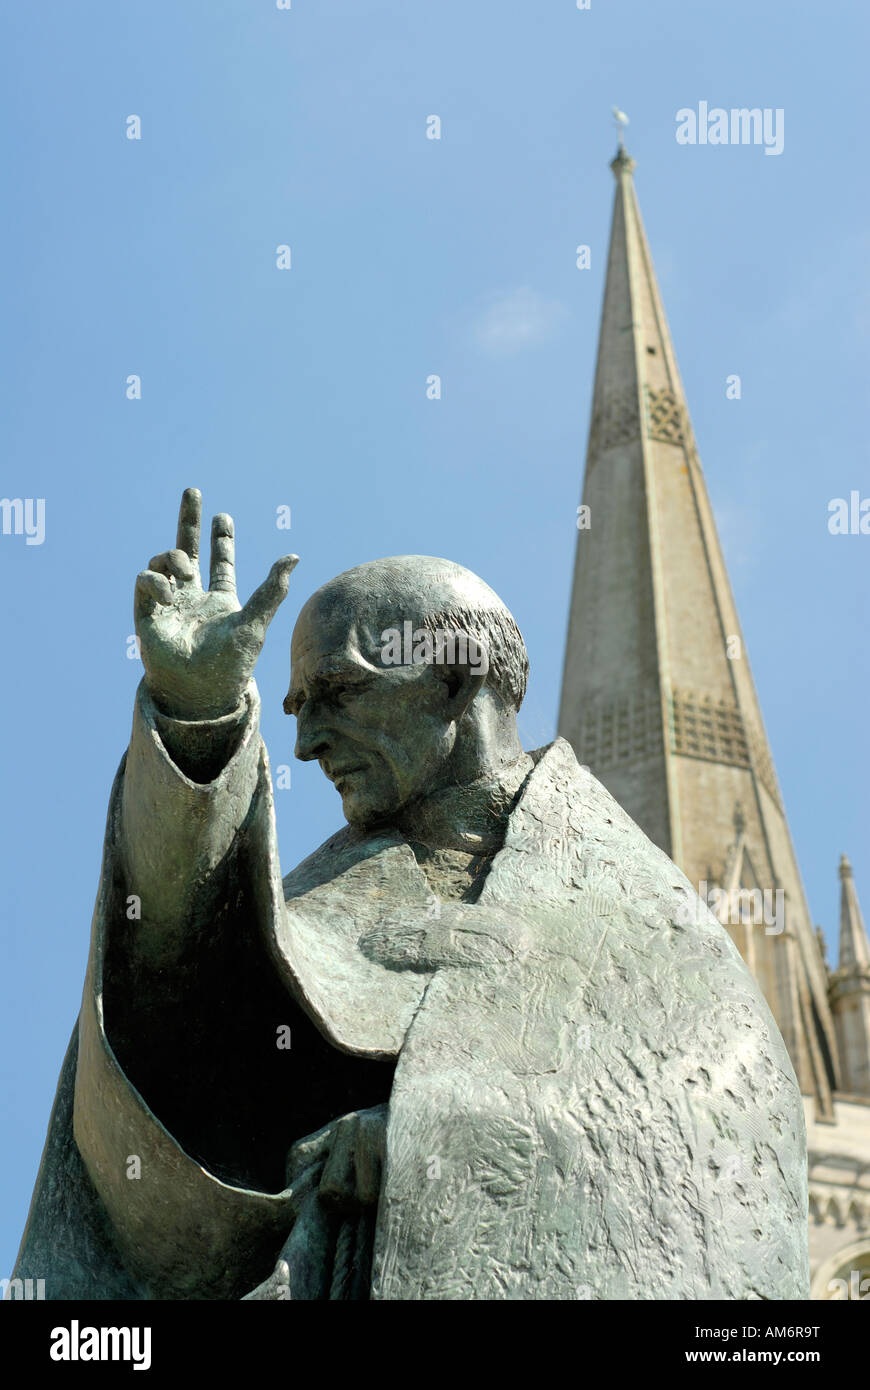 Statue of St Nicholas at Chichester with cathedral spire in background Vertical Format Stock Photo